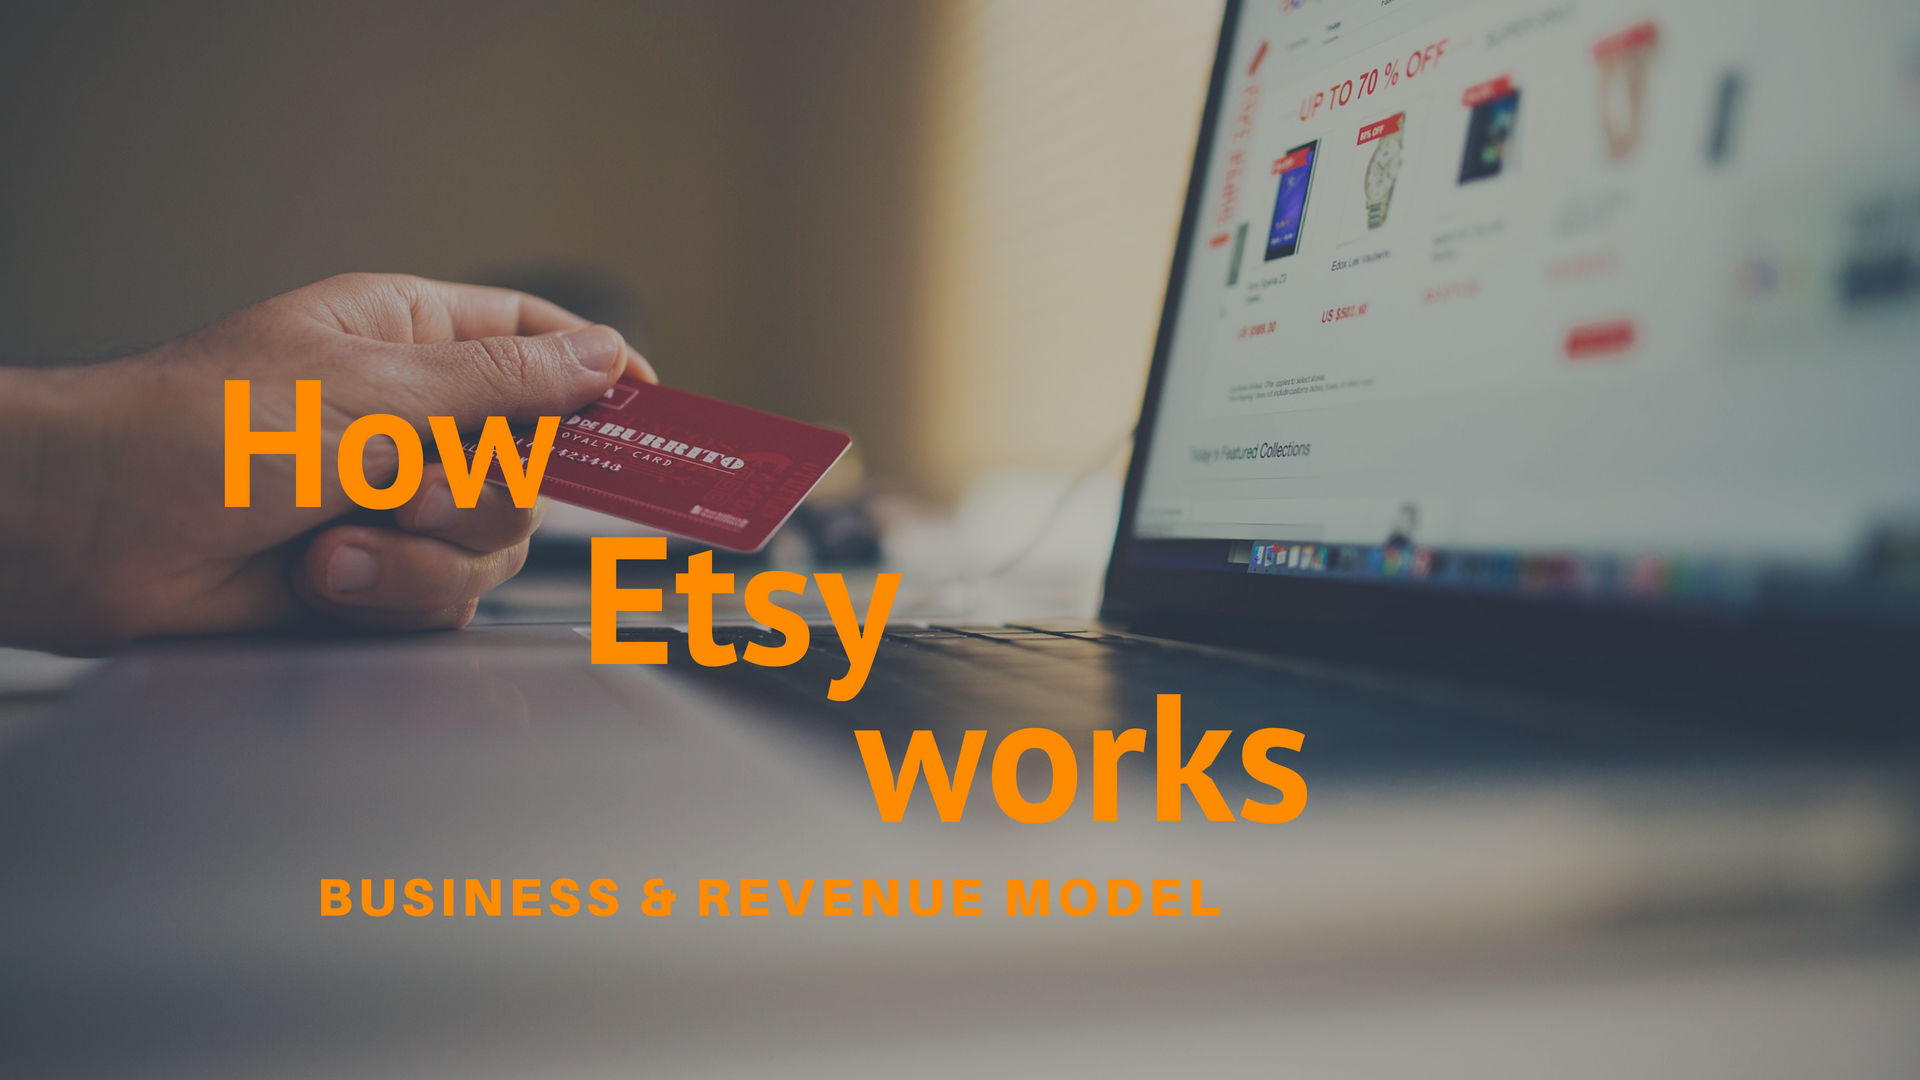 Shopify vs Etsy: Should You Sell on a Marketplace or Website?